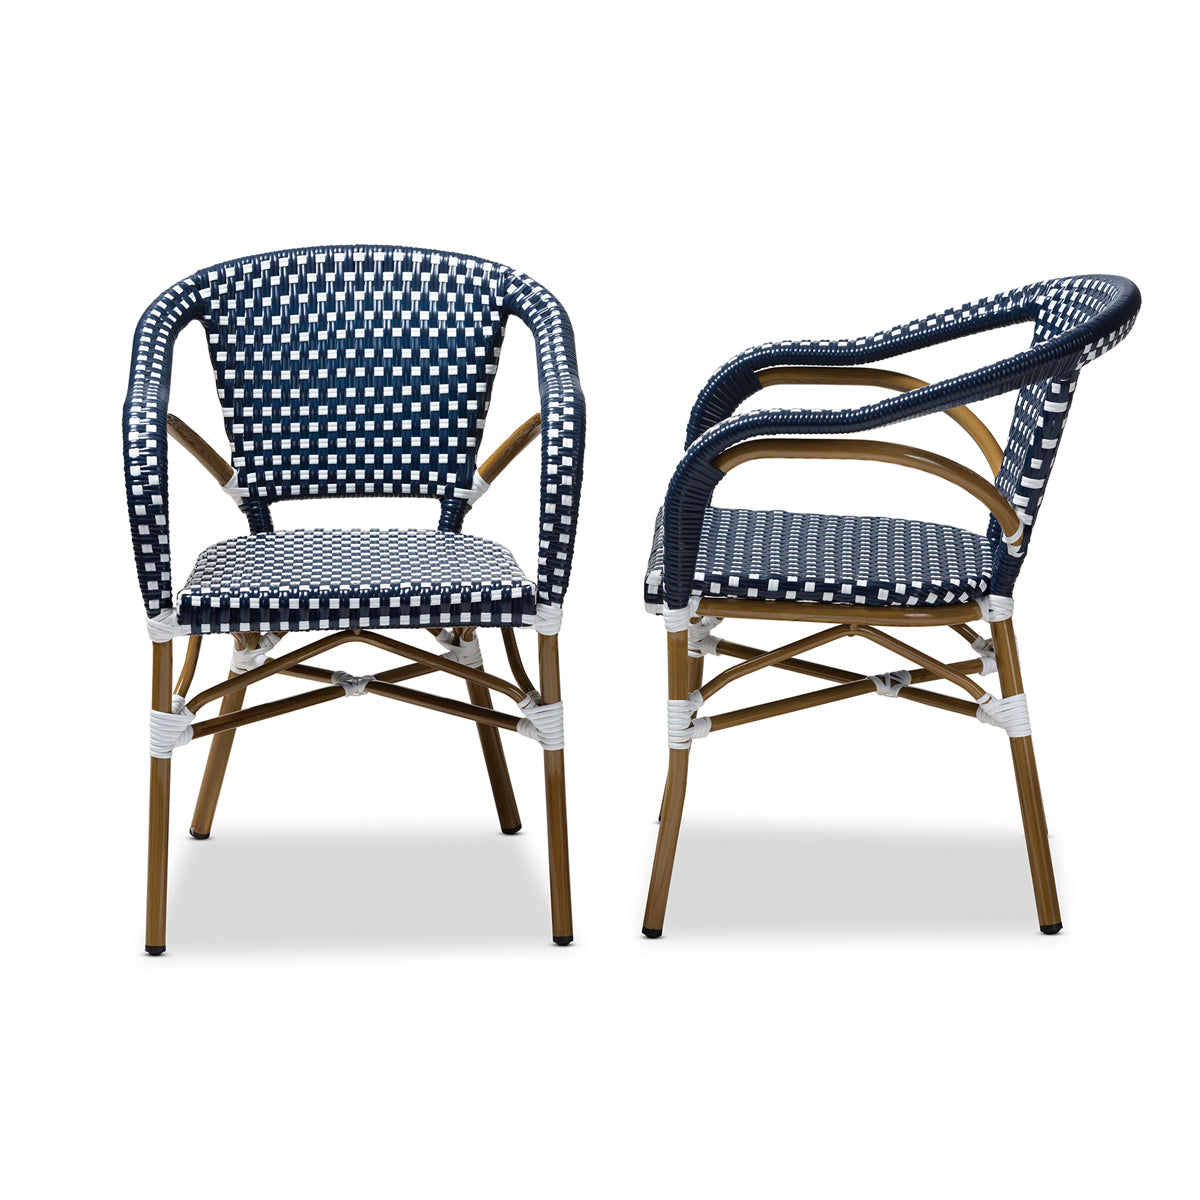 Baxton Studio Eliane Classic French Indoor and Outdoor Navy and White Bamboo Style Stackable Bistro Dining Chair Set of 2 Baxton Studio-dining chair-Minimal And Modern - 3